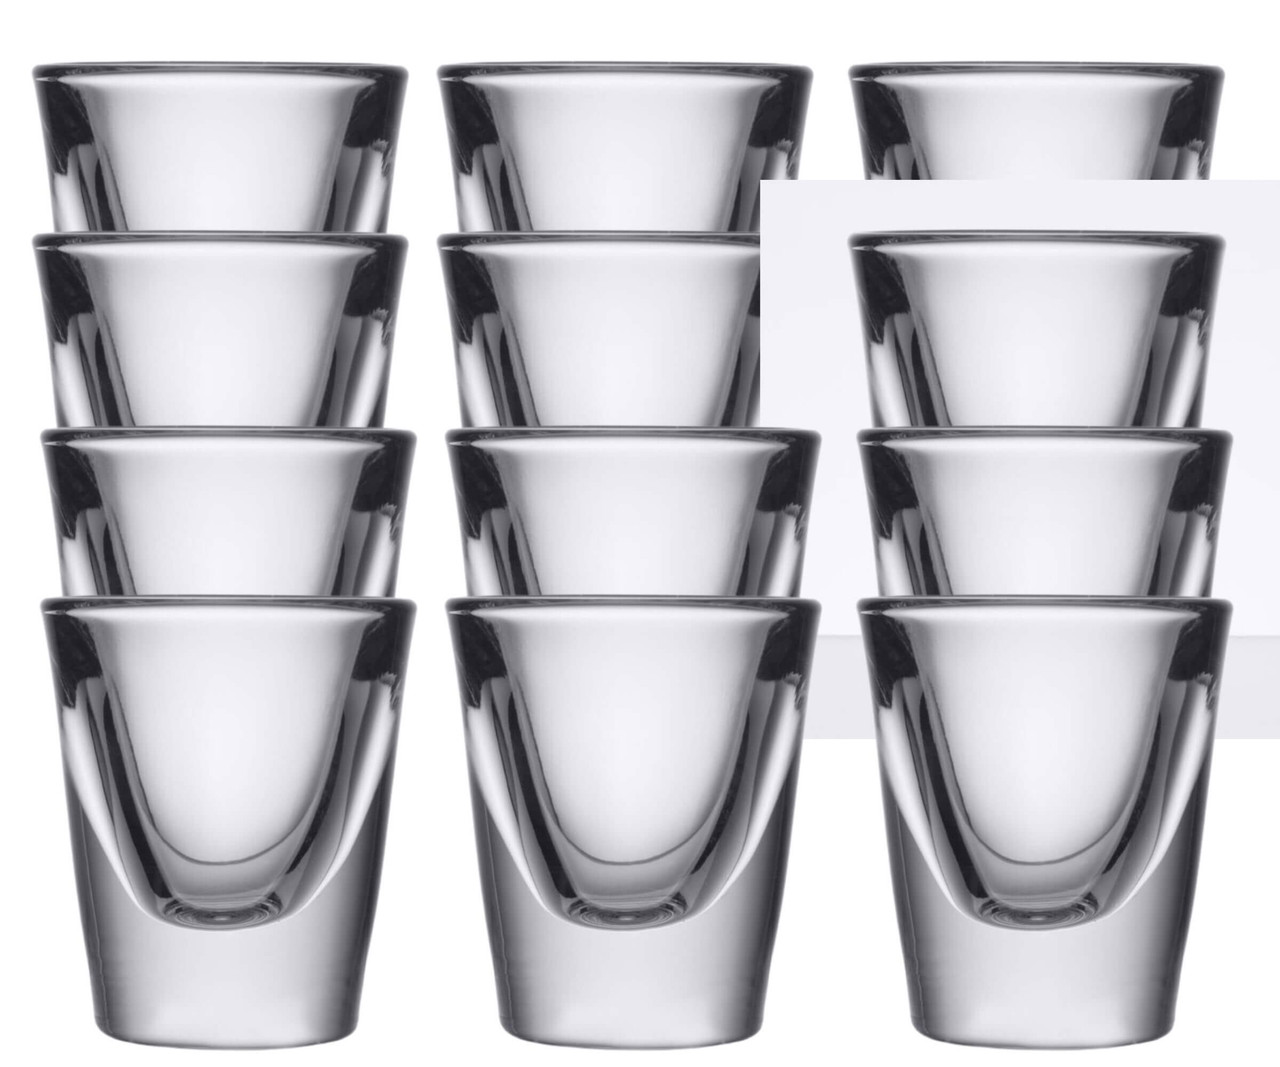 Libbey 12-Case for Perfect Shots - 1 oz. Shot Glass-Chicken Pieces